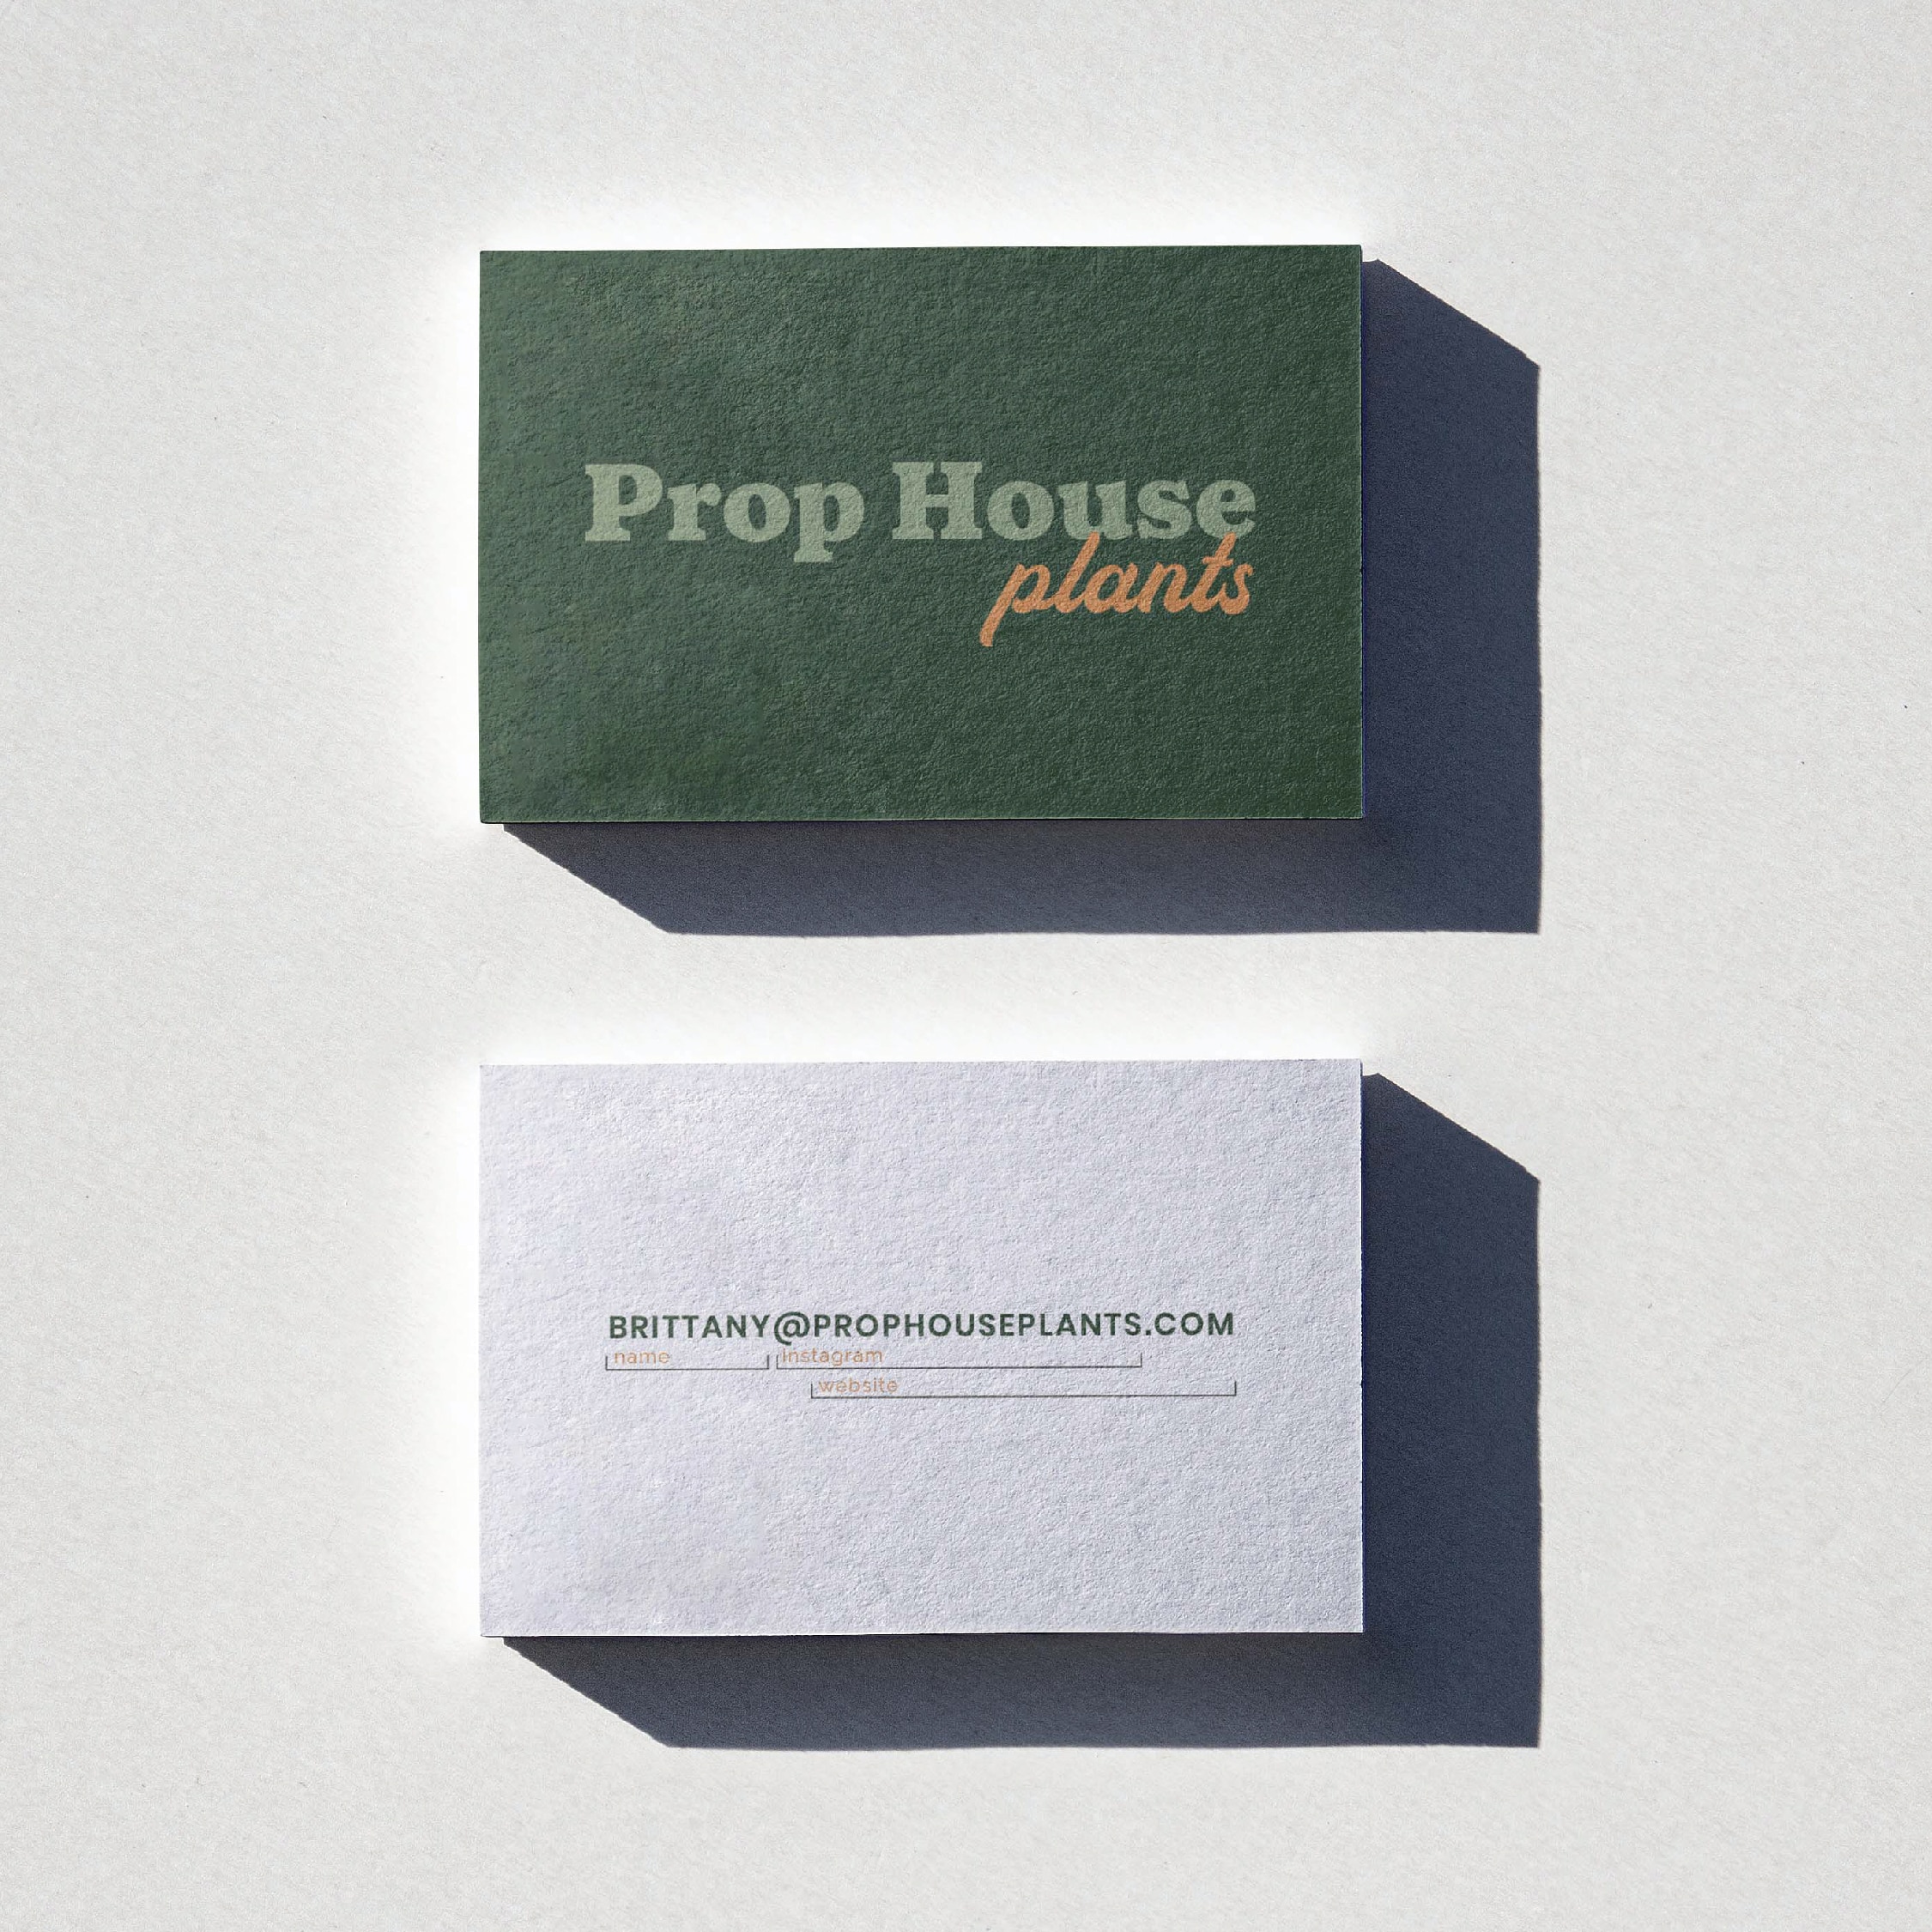 Business Cards for Prop House Plants by Stellen Design Branding Agency in Los Angeles CA